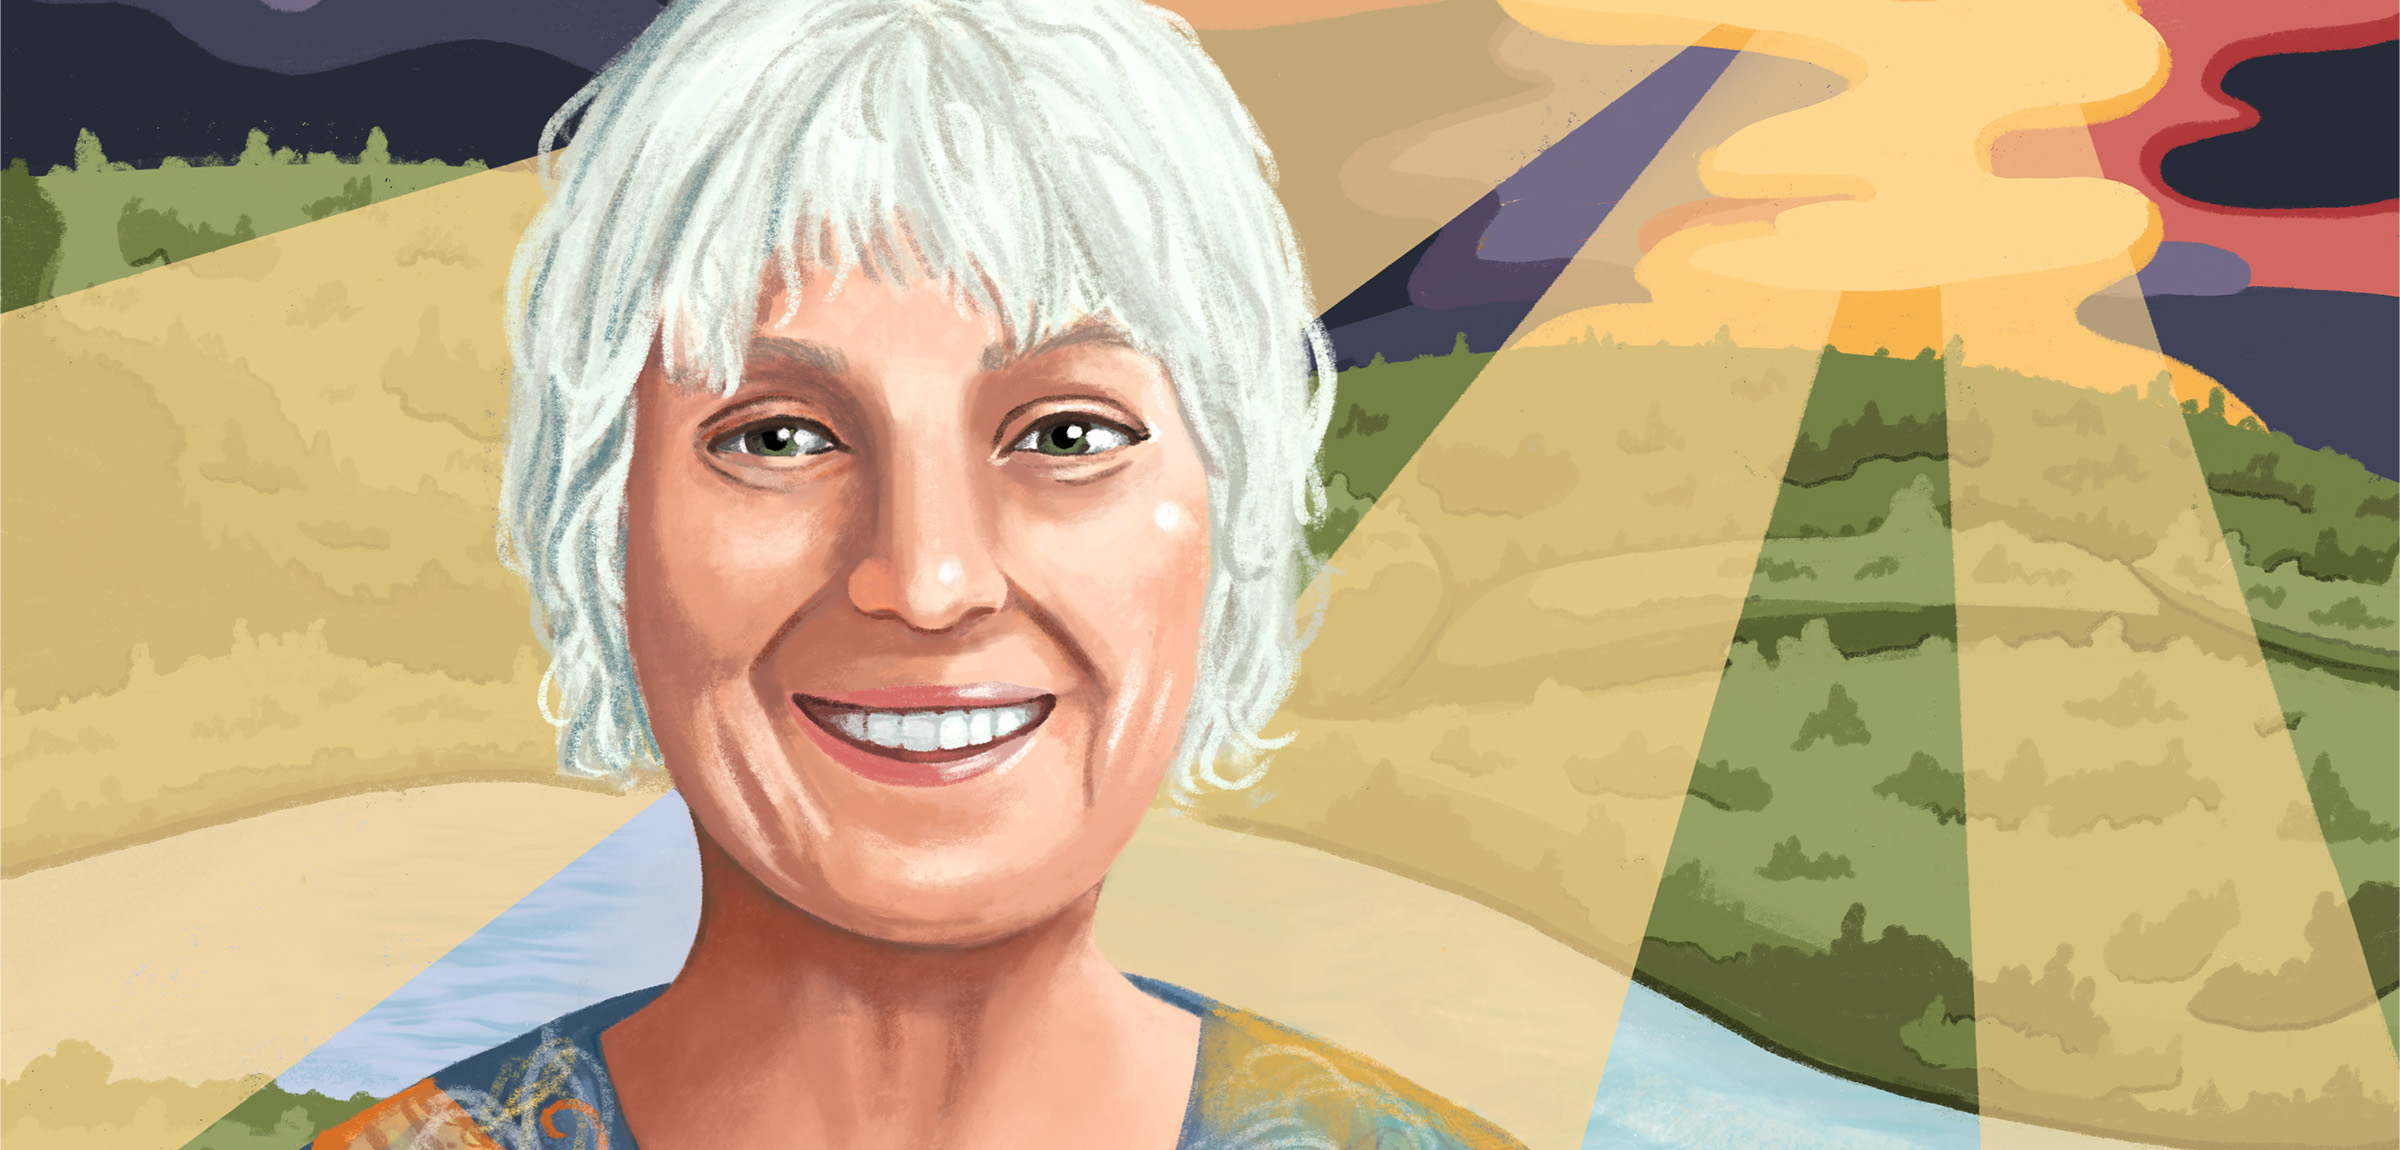 Illustration of women with short grey hair standing in front of a prairie field with the sun setting in the background.